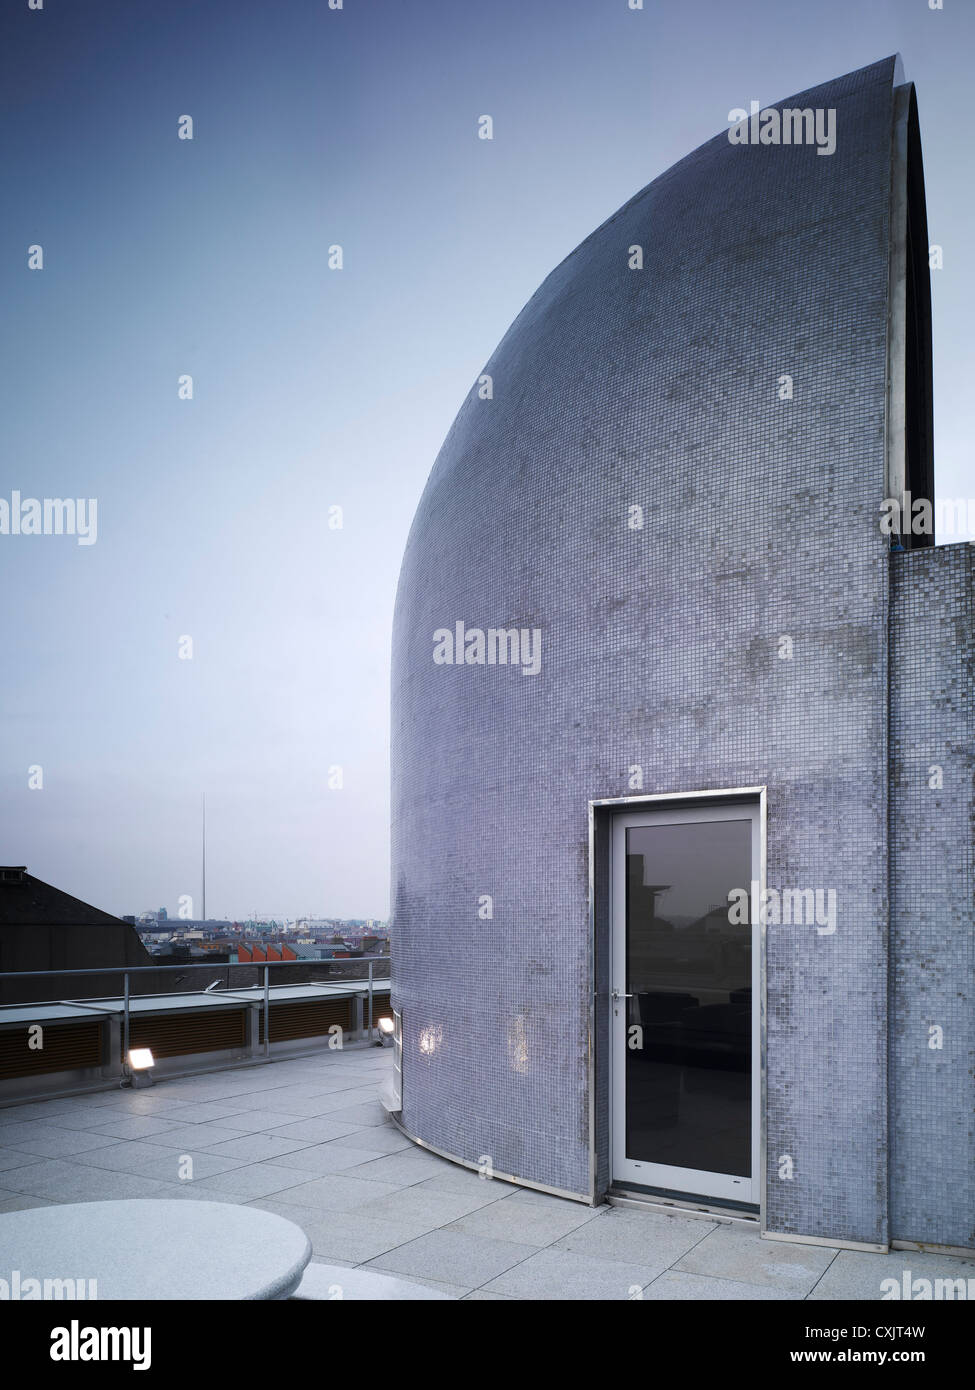 Dame Square, Dublin, Ireland. Architect: MBM Arquitectes, 2007. View of roof access showing view over city. Stock Photo